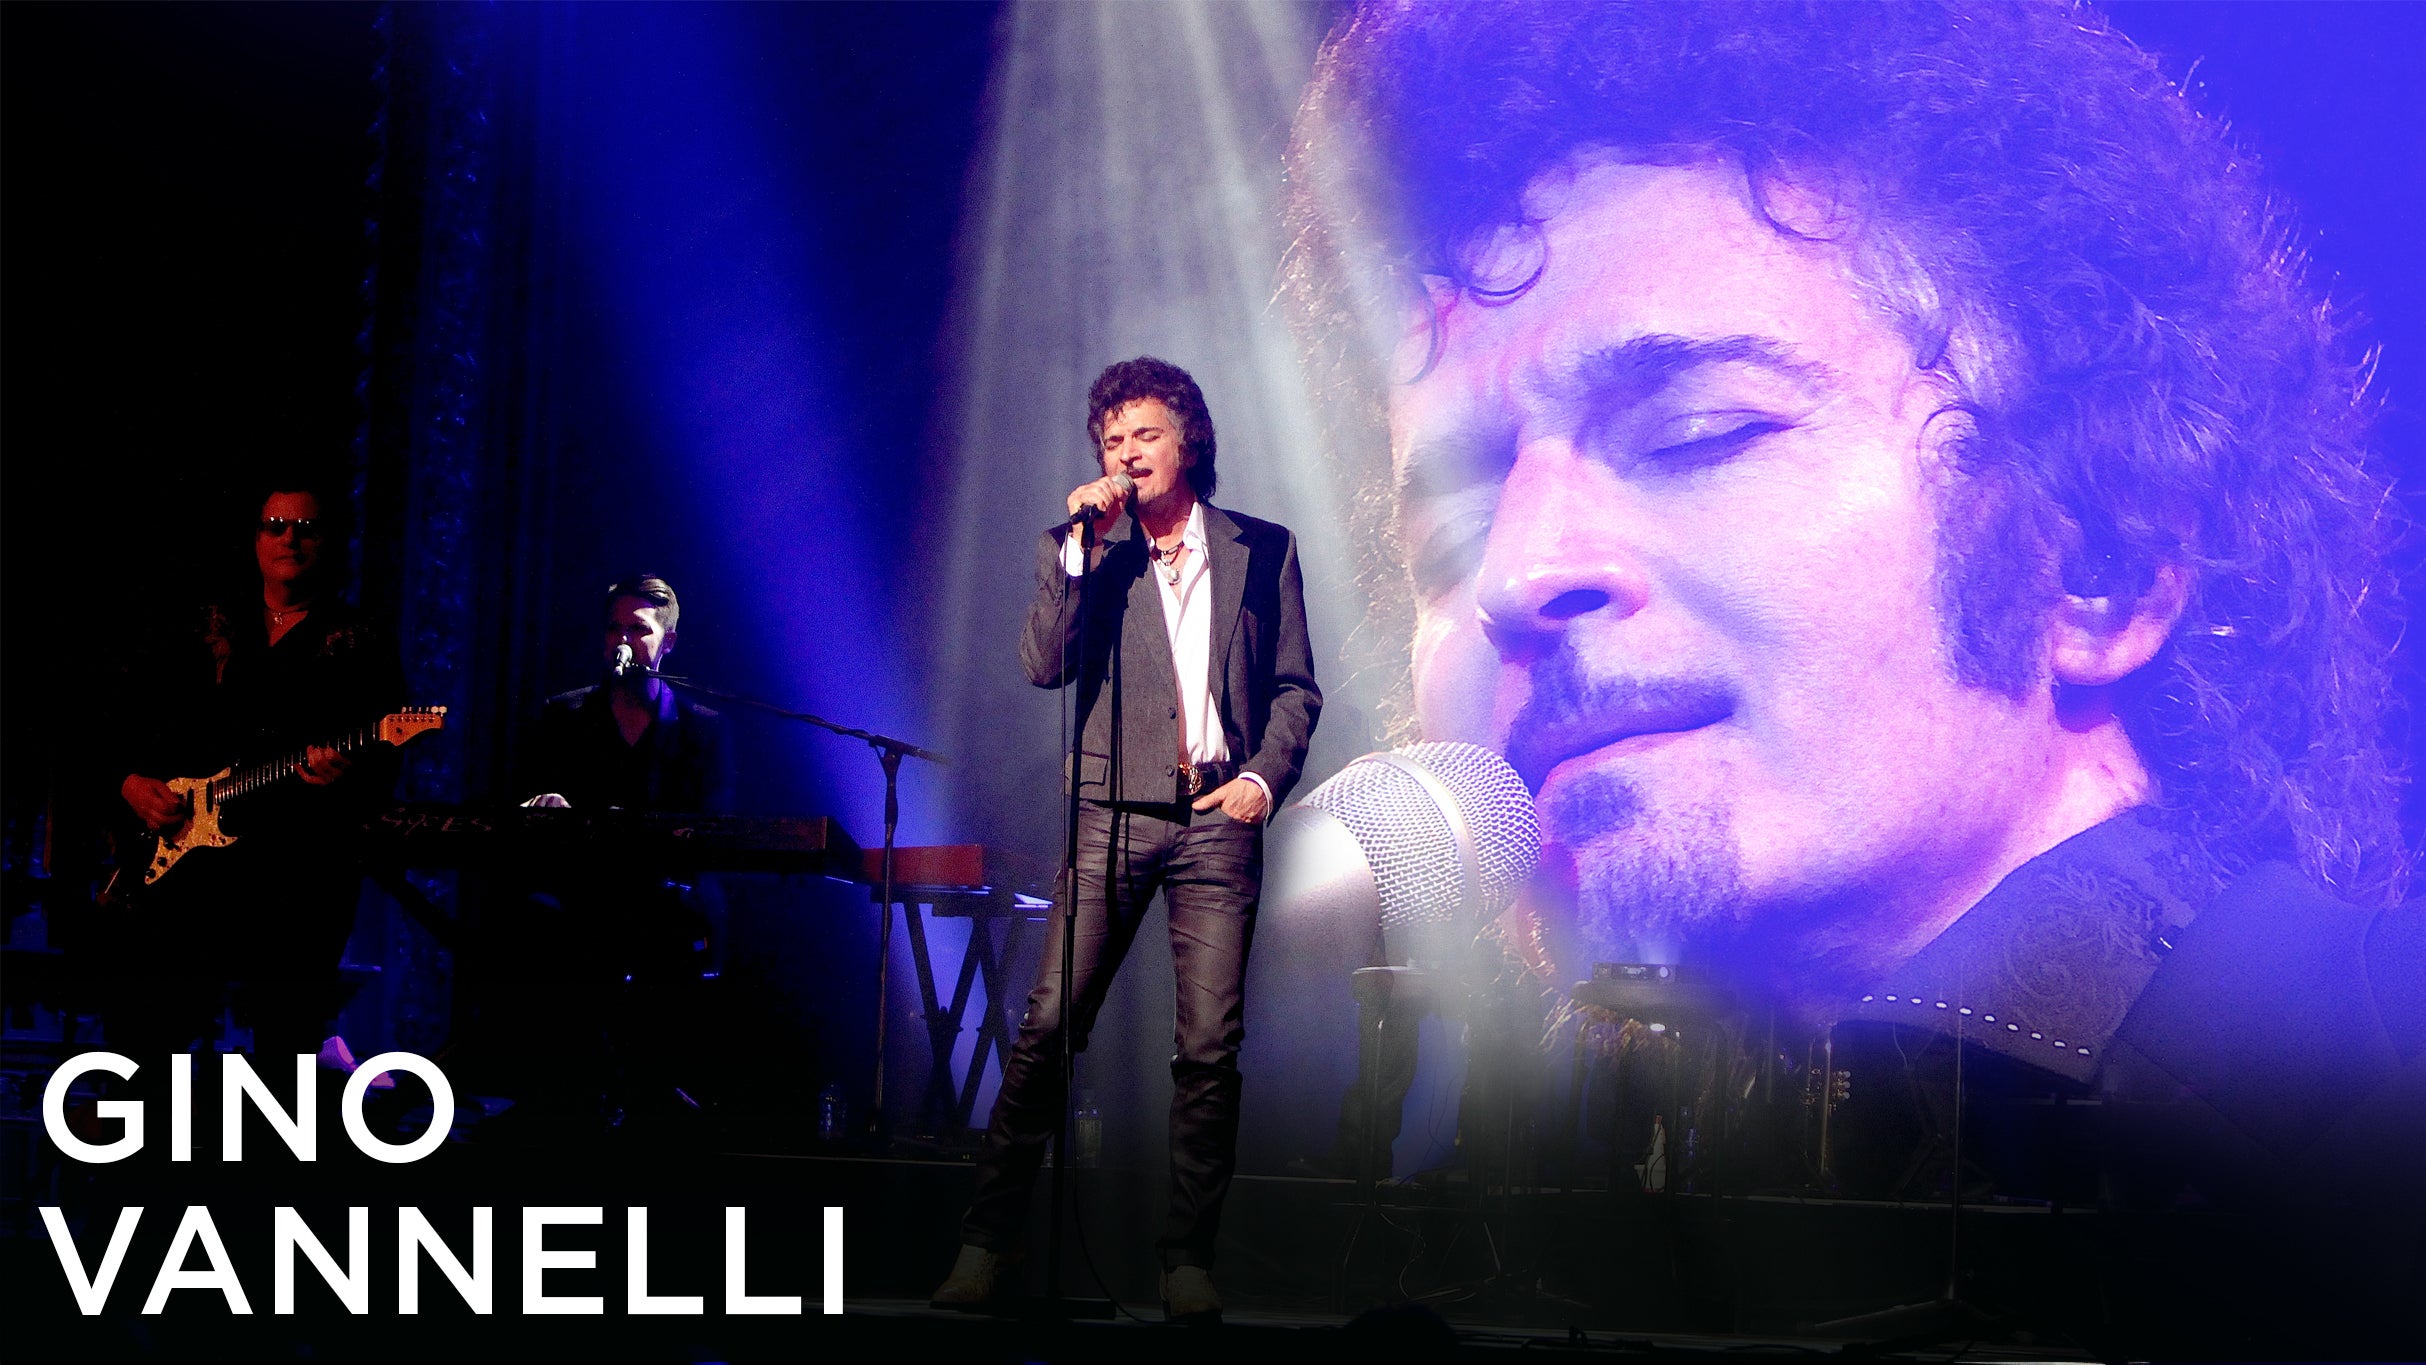 Gino Vannelli presale code for early tickets in Las Vegas